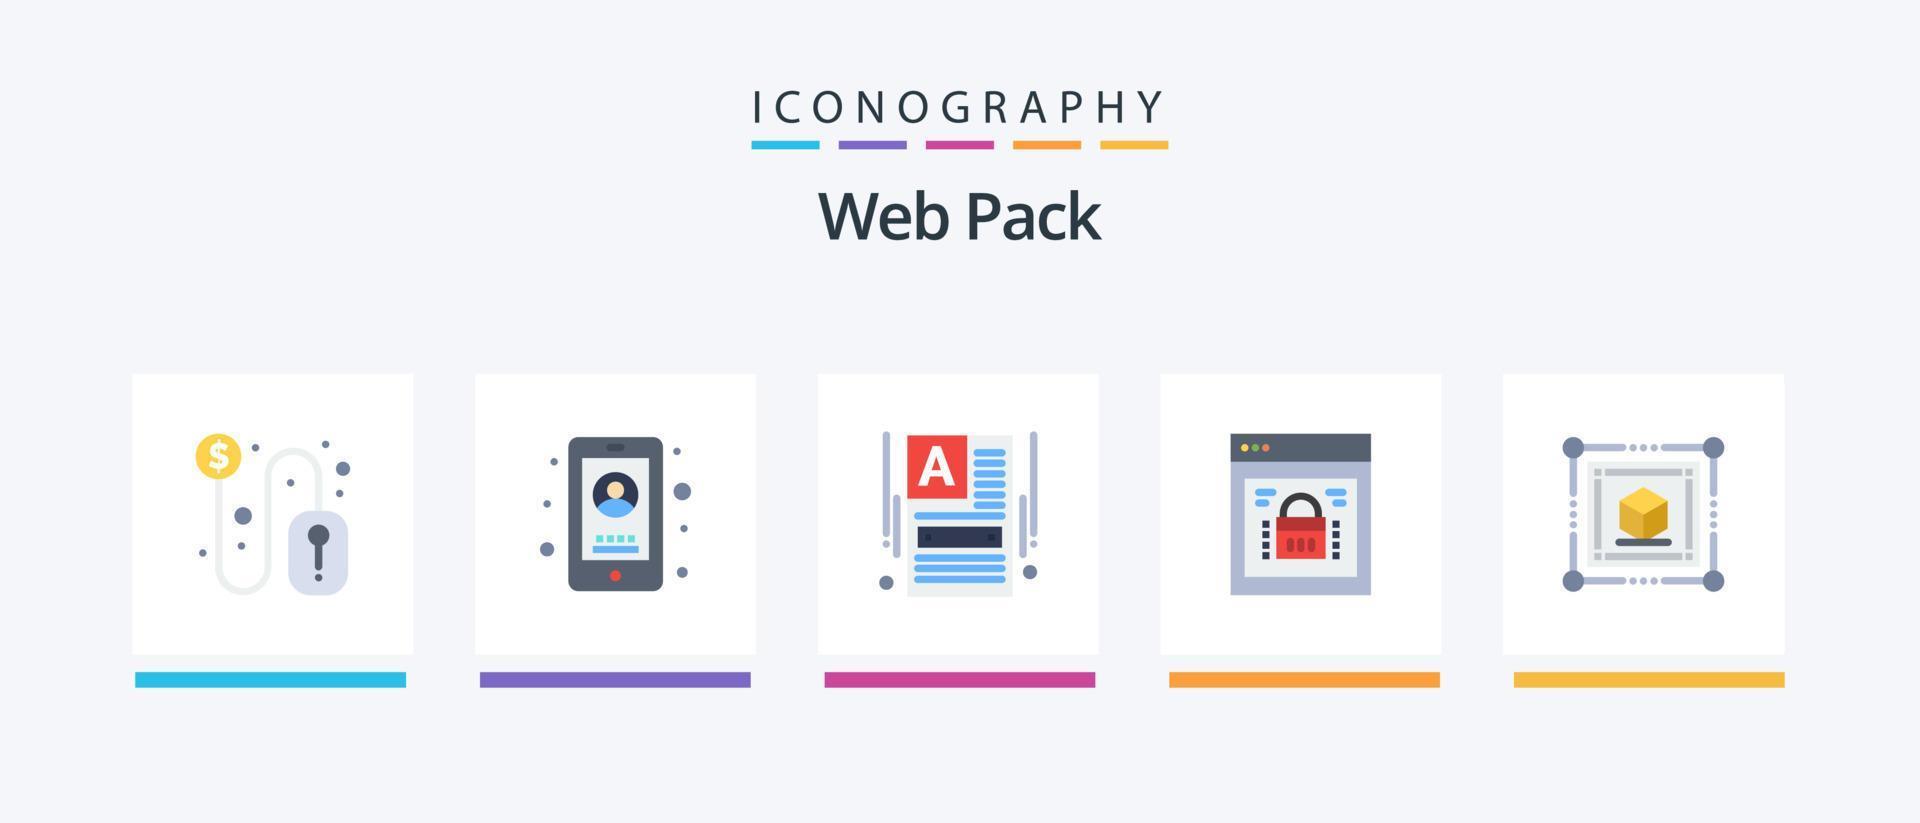 Web Pack Flat 5 Icon Pack Including d. web lock. make a website. protected browser. information security. Creative Icons Design vector